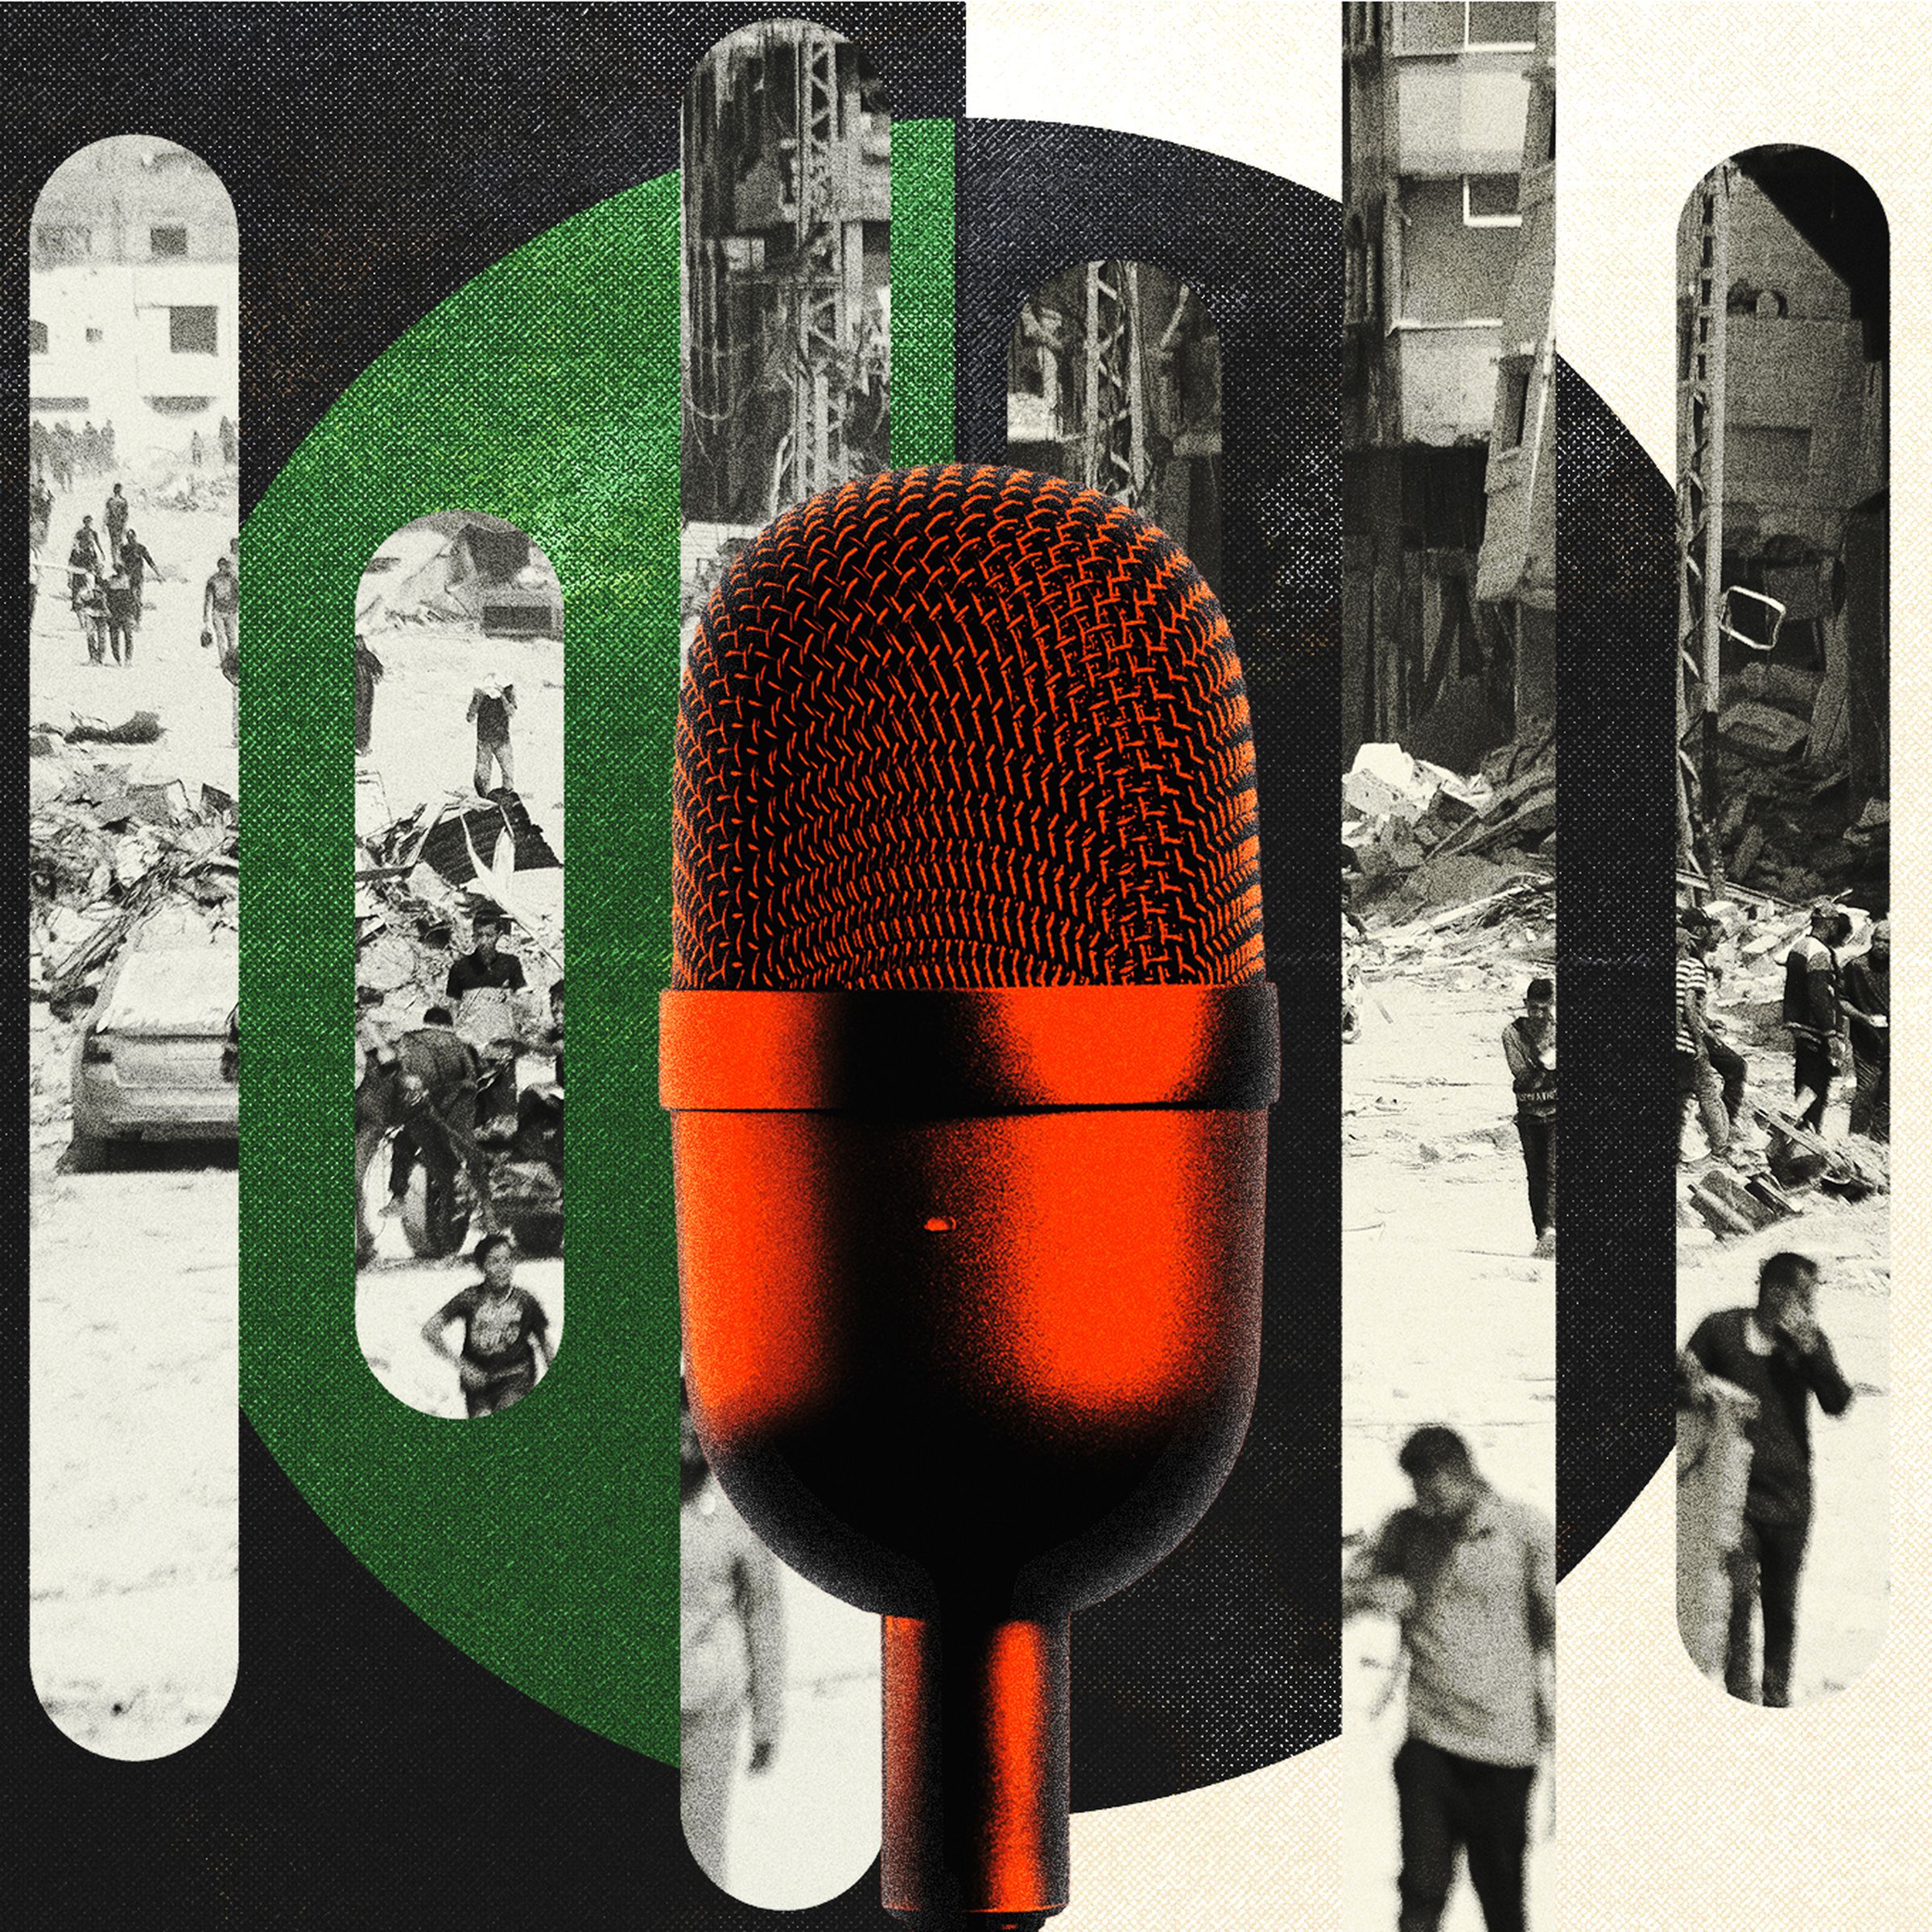 Illustration of a microphone on top of a collage of an image of Gaza City.